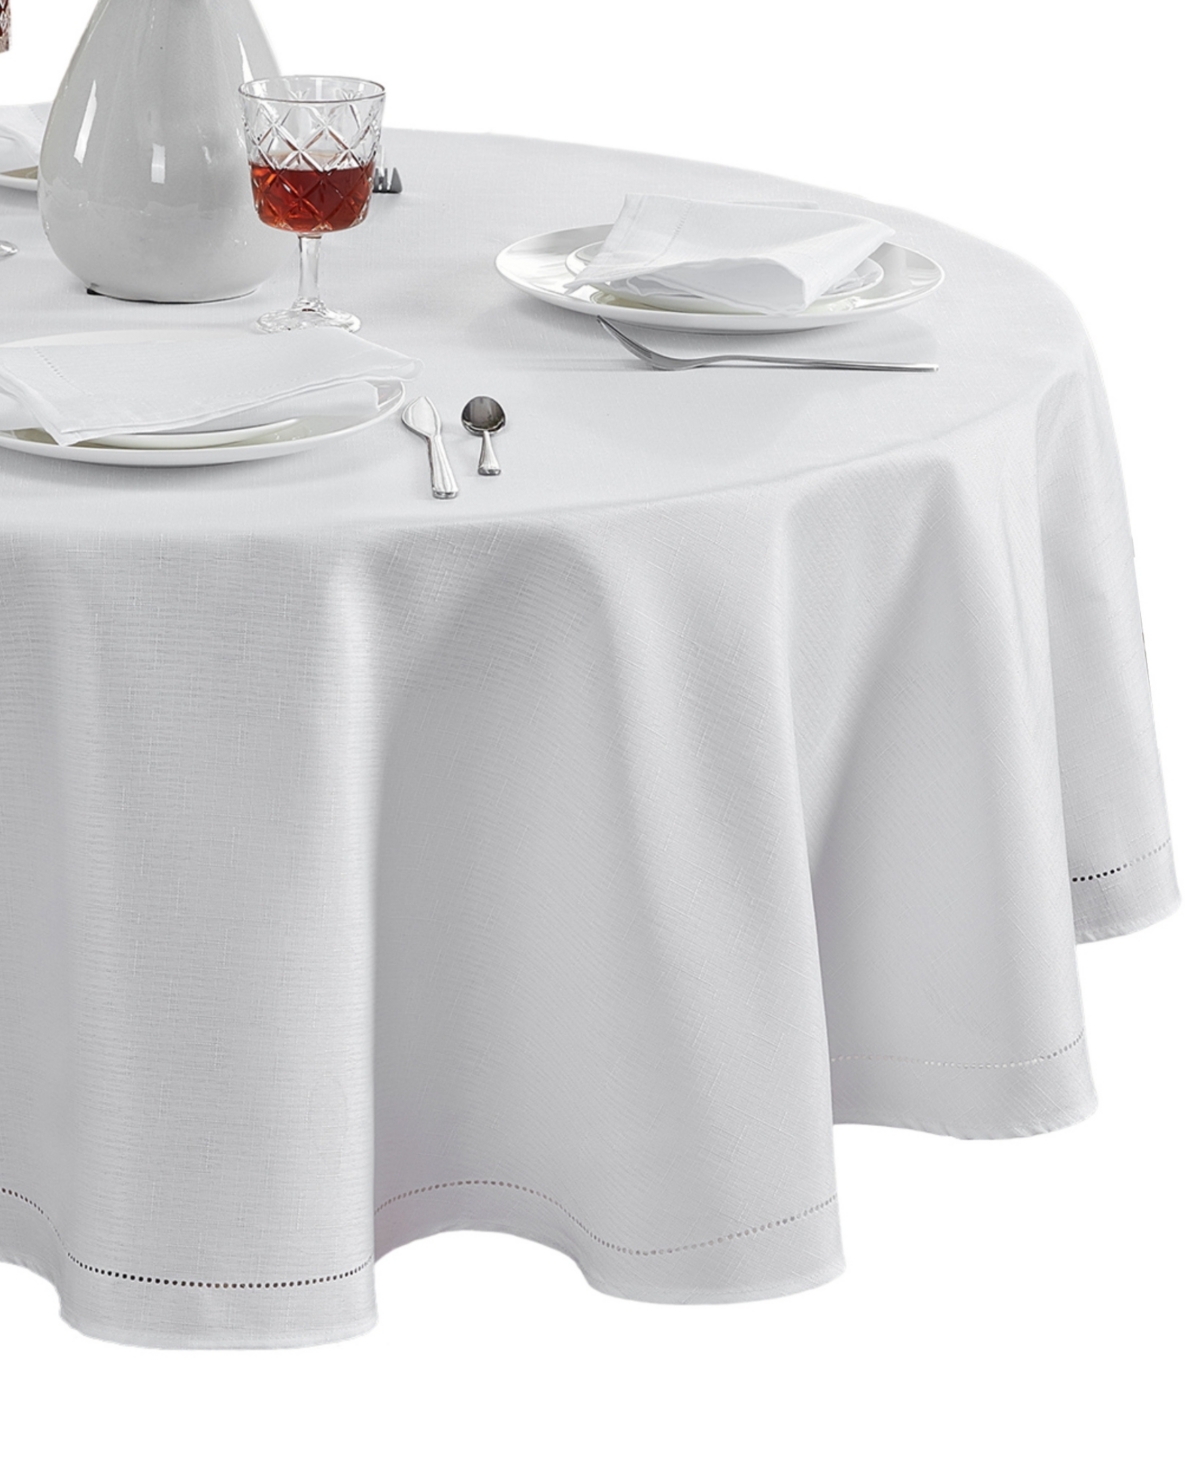 Elrene Alison Eyelet Punched Border Fabric Tablecloth, 70" Round In White